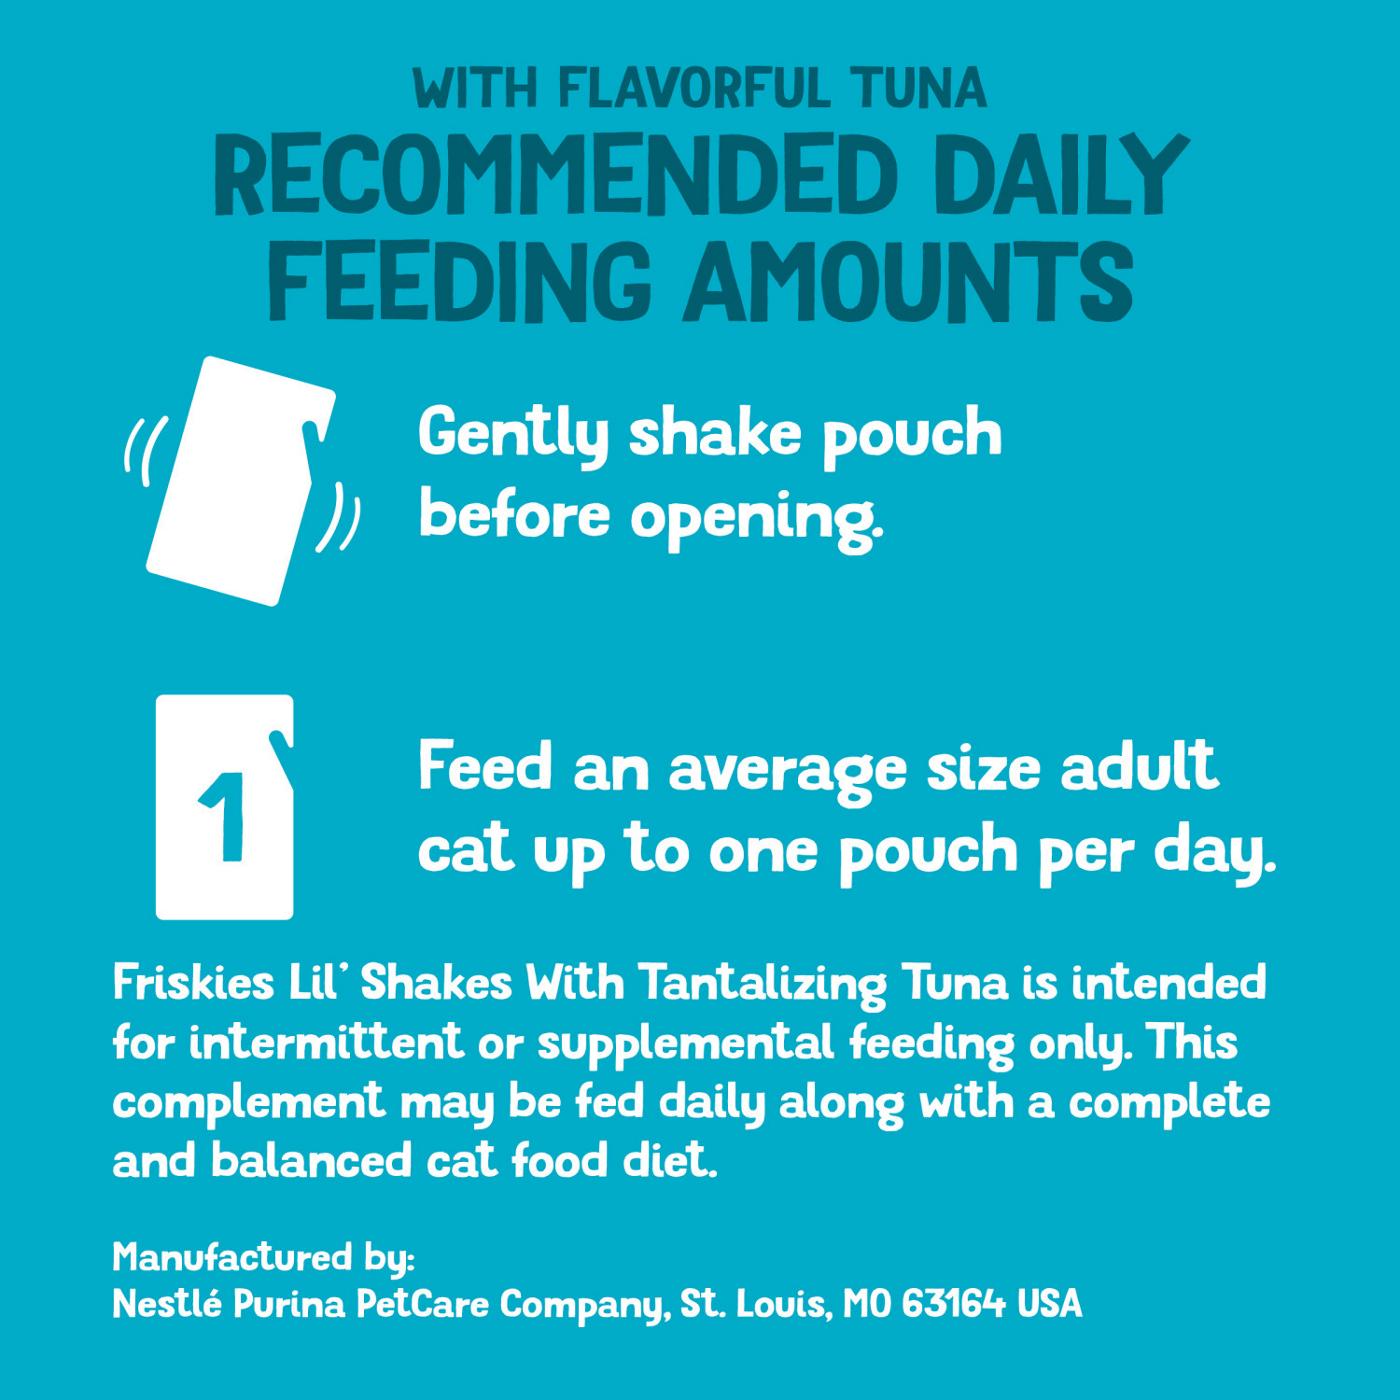 Friskies Purina Friskies Wet Pureed Cat Food Topper, Lil' Shakes With Tantalizing Tuna Lickable Cat Treats; image 5 of 8